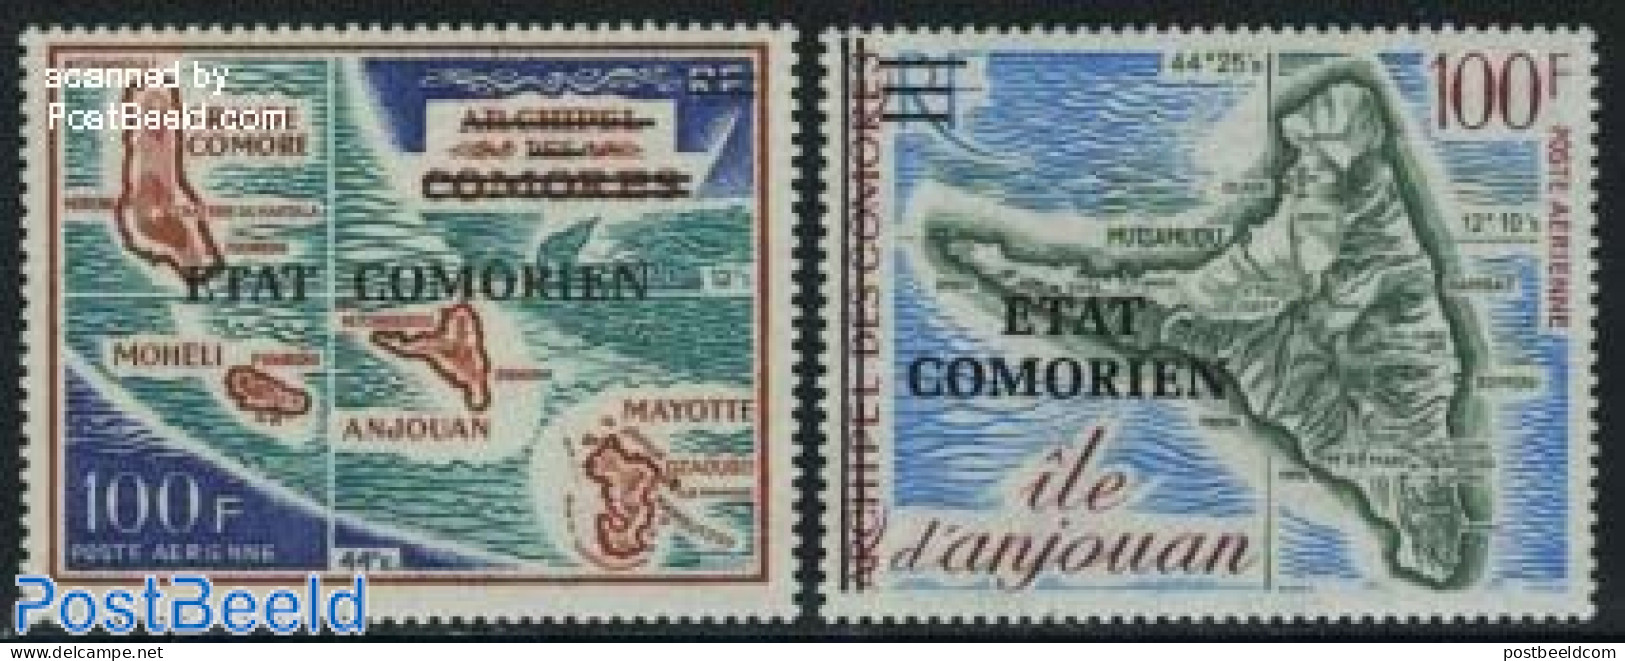 Comoros 1975 Maps, Overprints 2v, Mint NH, Various - Maps - Geography